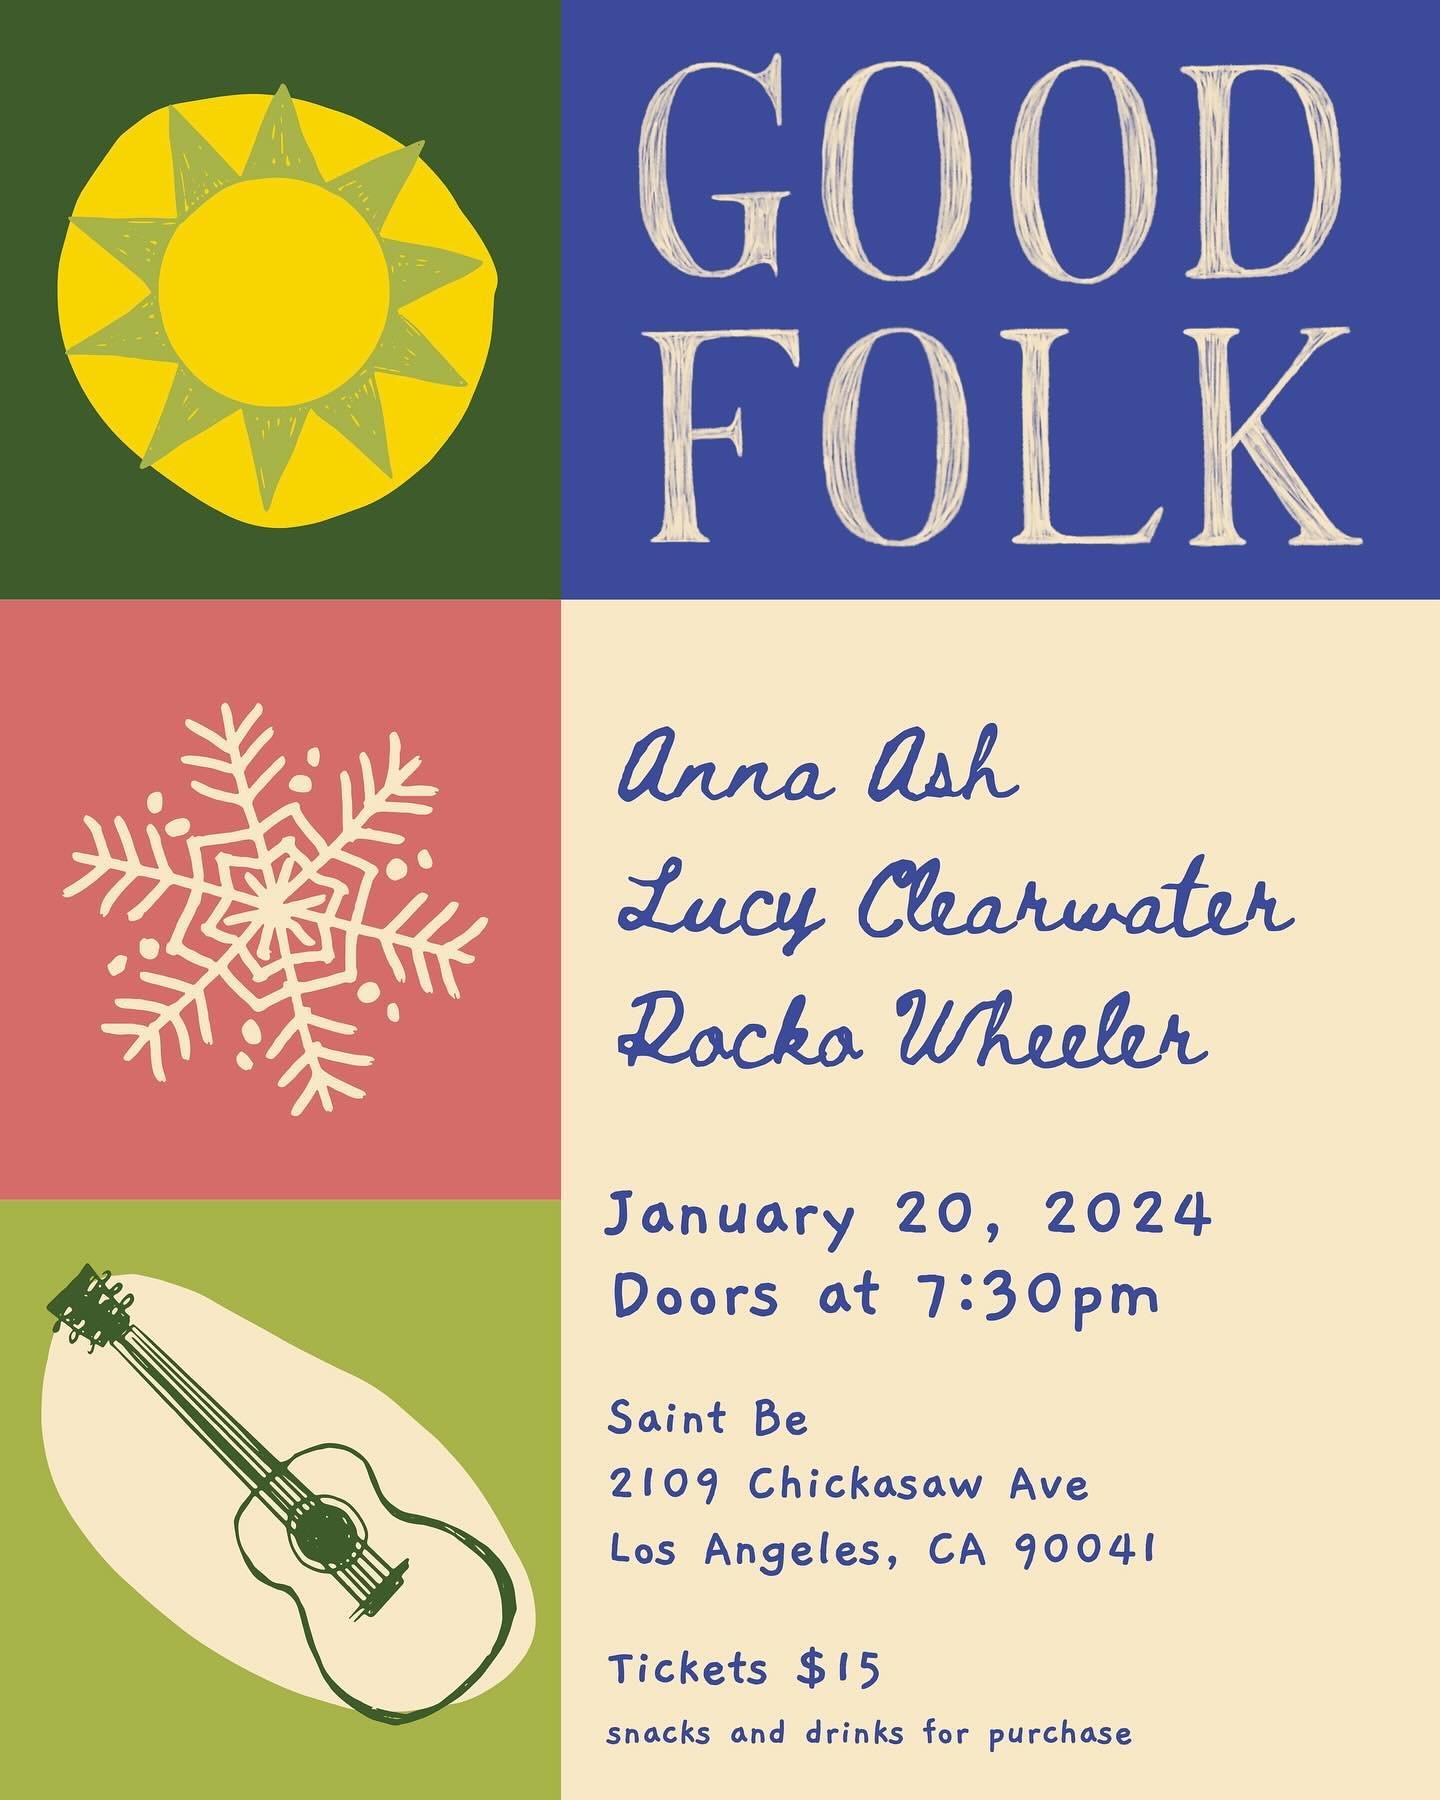 I am full tilt jazzed to play Abby Litman&rsquo;s @goodfolkla series this Saturday at St. Barnabas Church in Eagle Rock. This is a gorgeous sounding room, there&rsquo;s so much parking, it&rsquo;s SEATED, and they serve wine AND hot tea, so it&rsquo;